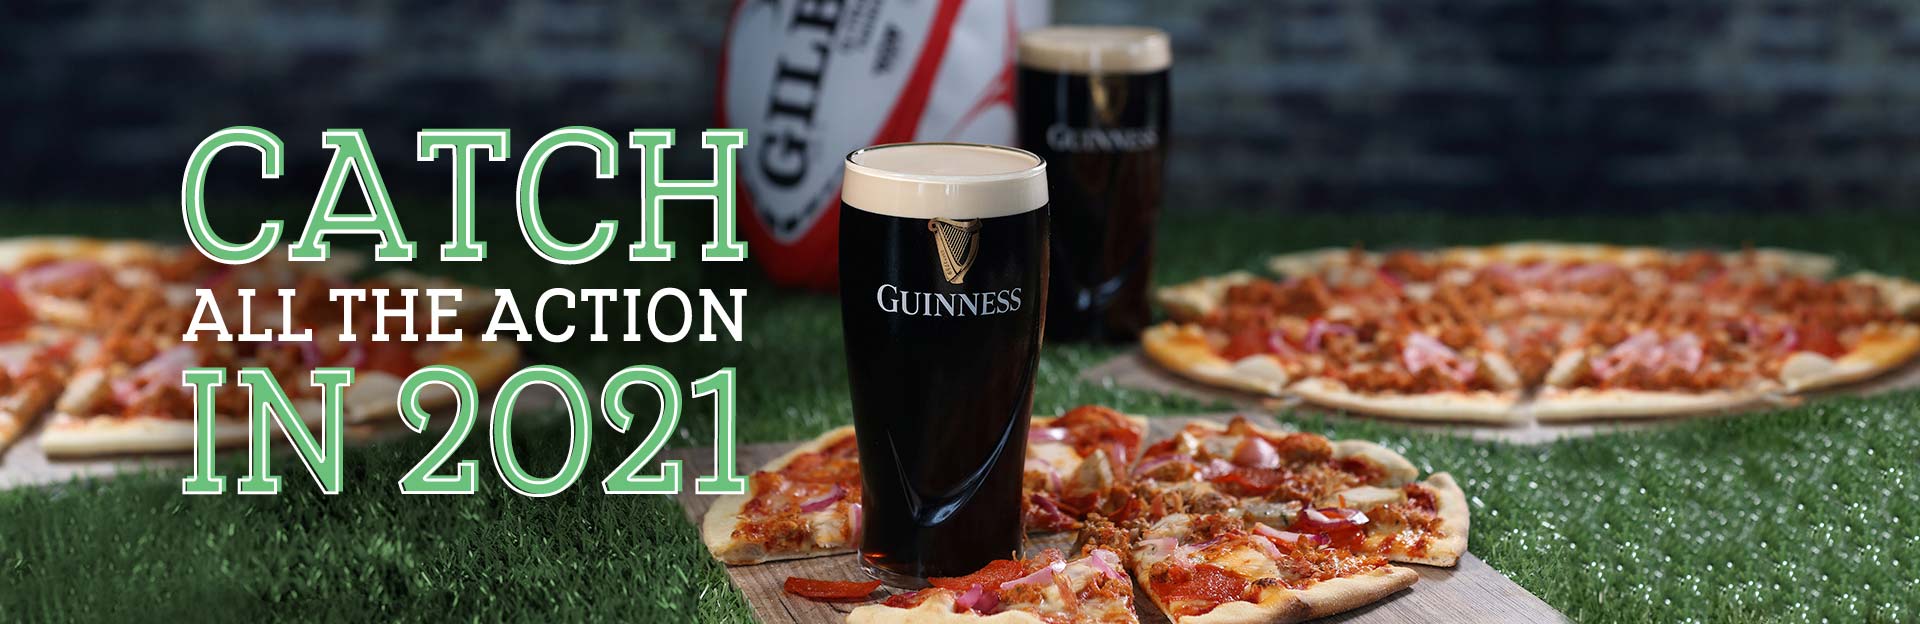 Watch the Six Nations live at Stonehouse